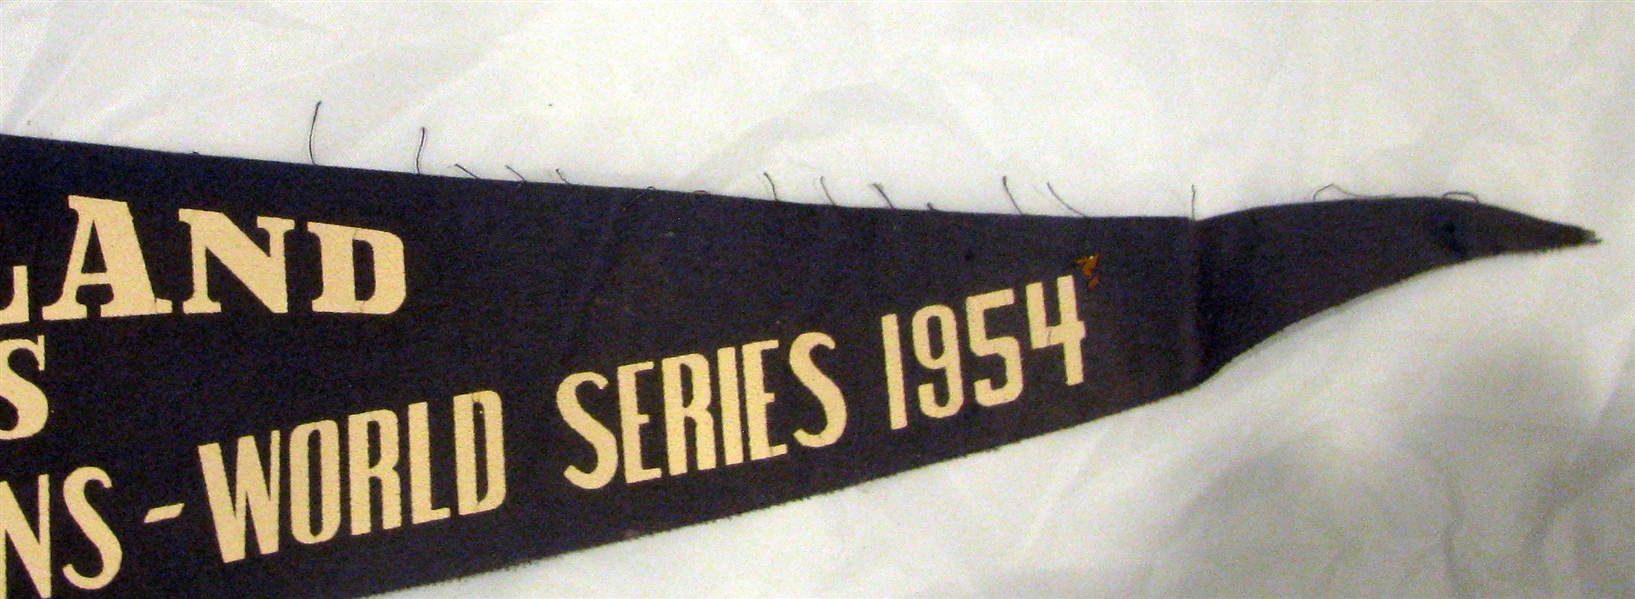 1954 CLEVELAND INDIANS WORLD SERIES' PENNANT